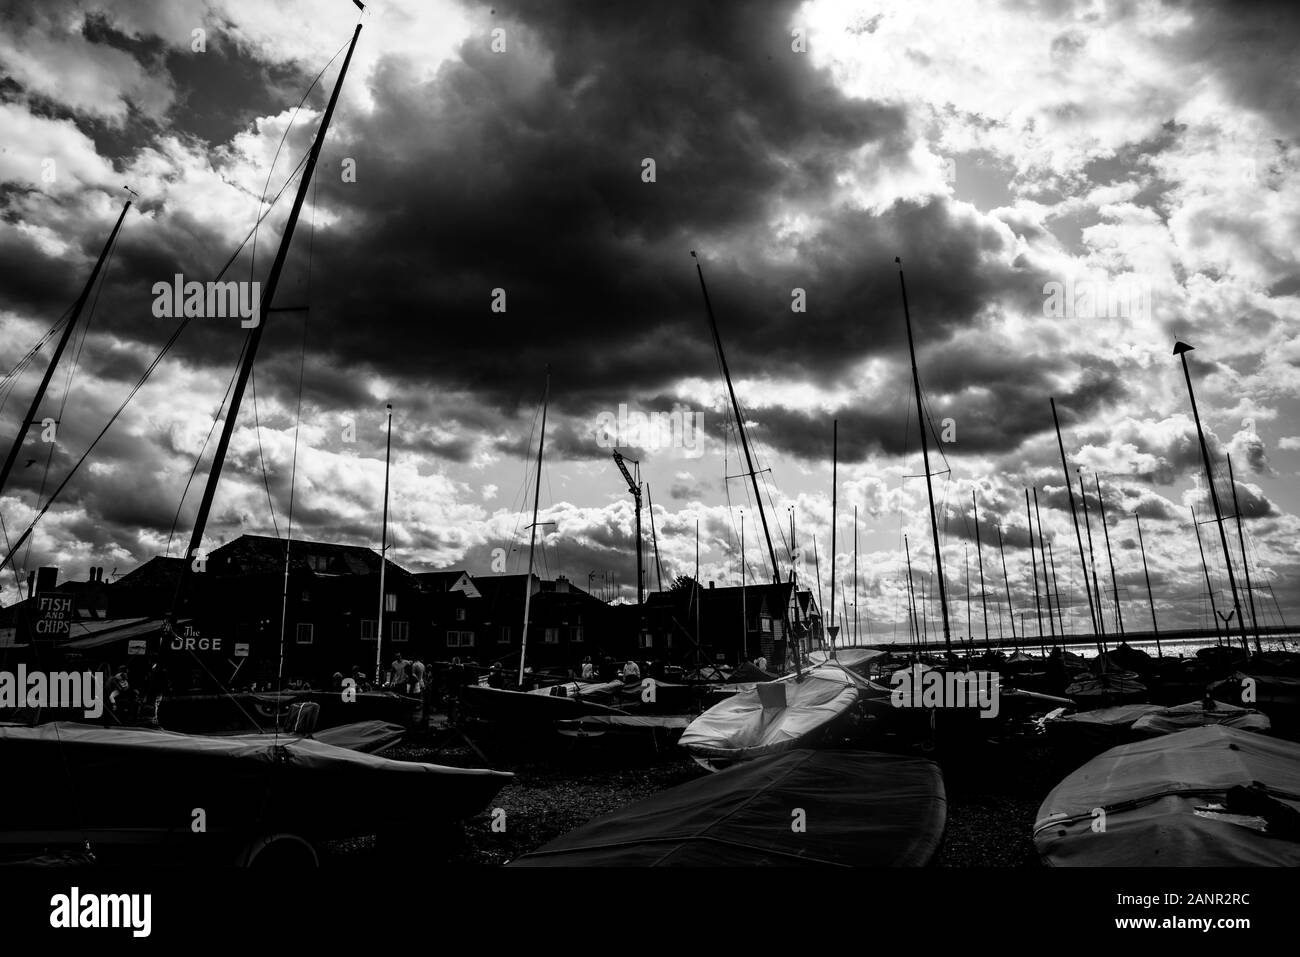 Yacht masts standout like prickles on procupine as darck clouds gather ofer Whitstable waterfront, England. Stock Photo